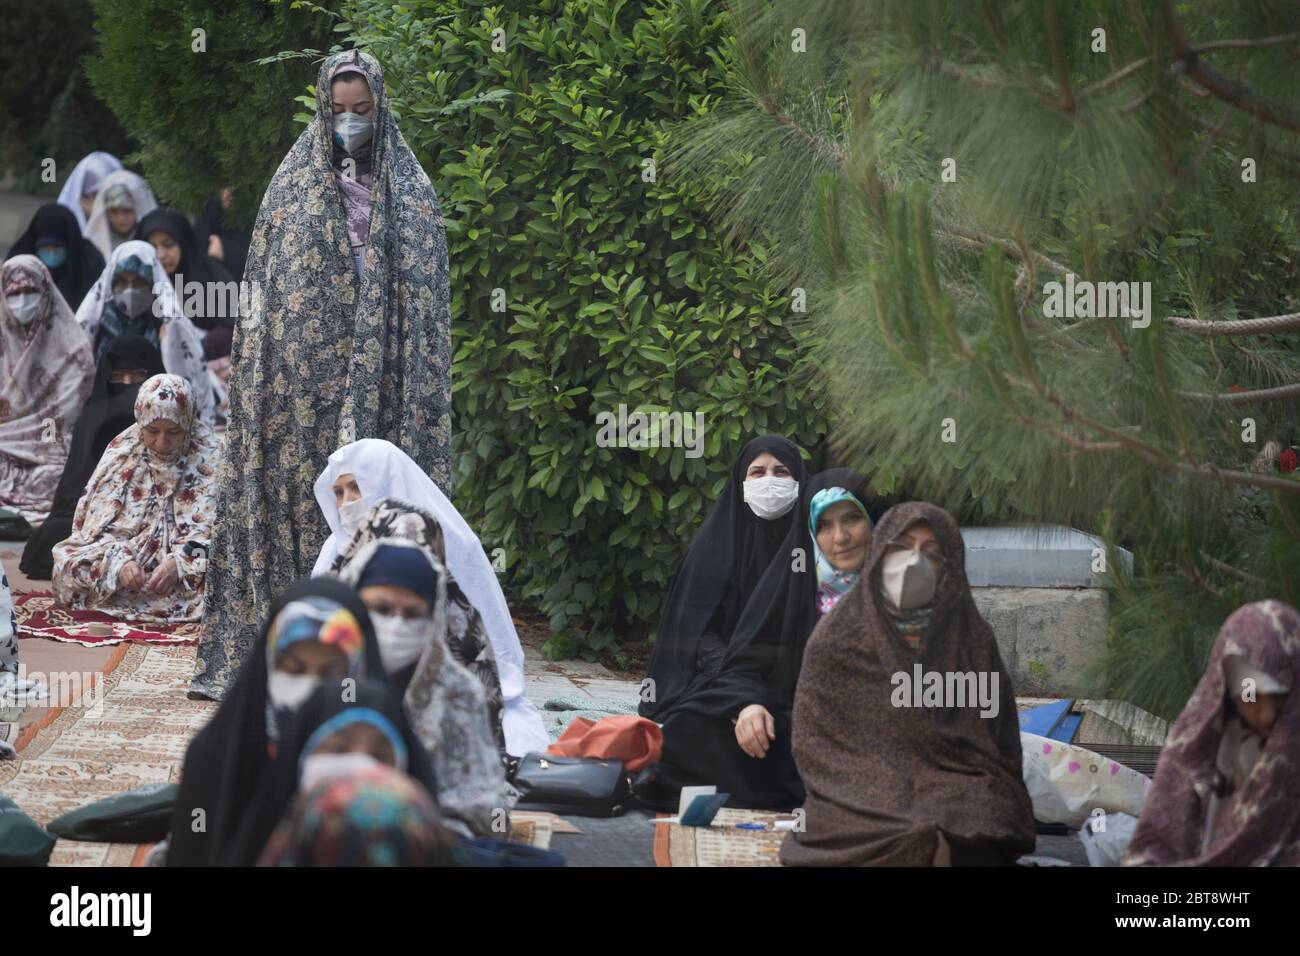 May 24, 2020, Tehran, Iran: Shia Muslims wearing protective face masks prepare to offer Eid al-Fitr prayers marking the end of the Islamic fasting month of Ramadan following the spread of the new coronavirus (COVID-19), at Tehran University Campus Mosque, in Tehran, Iran. Muslims worldwide celebrate one of their biggest holidays under the long shadow of the coronavirus, with millions confined to their homes and others gripped by economic concerns during what is usually a festive time of shopping and celebration. In Iran, which has endured the deadliest outbreak in the Middle East, authorities Stock Photo